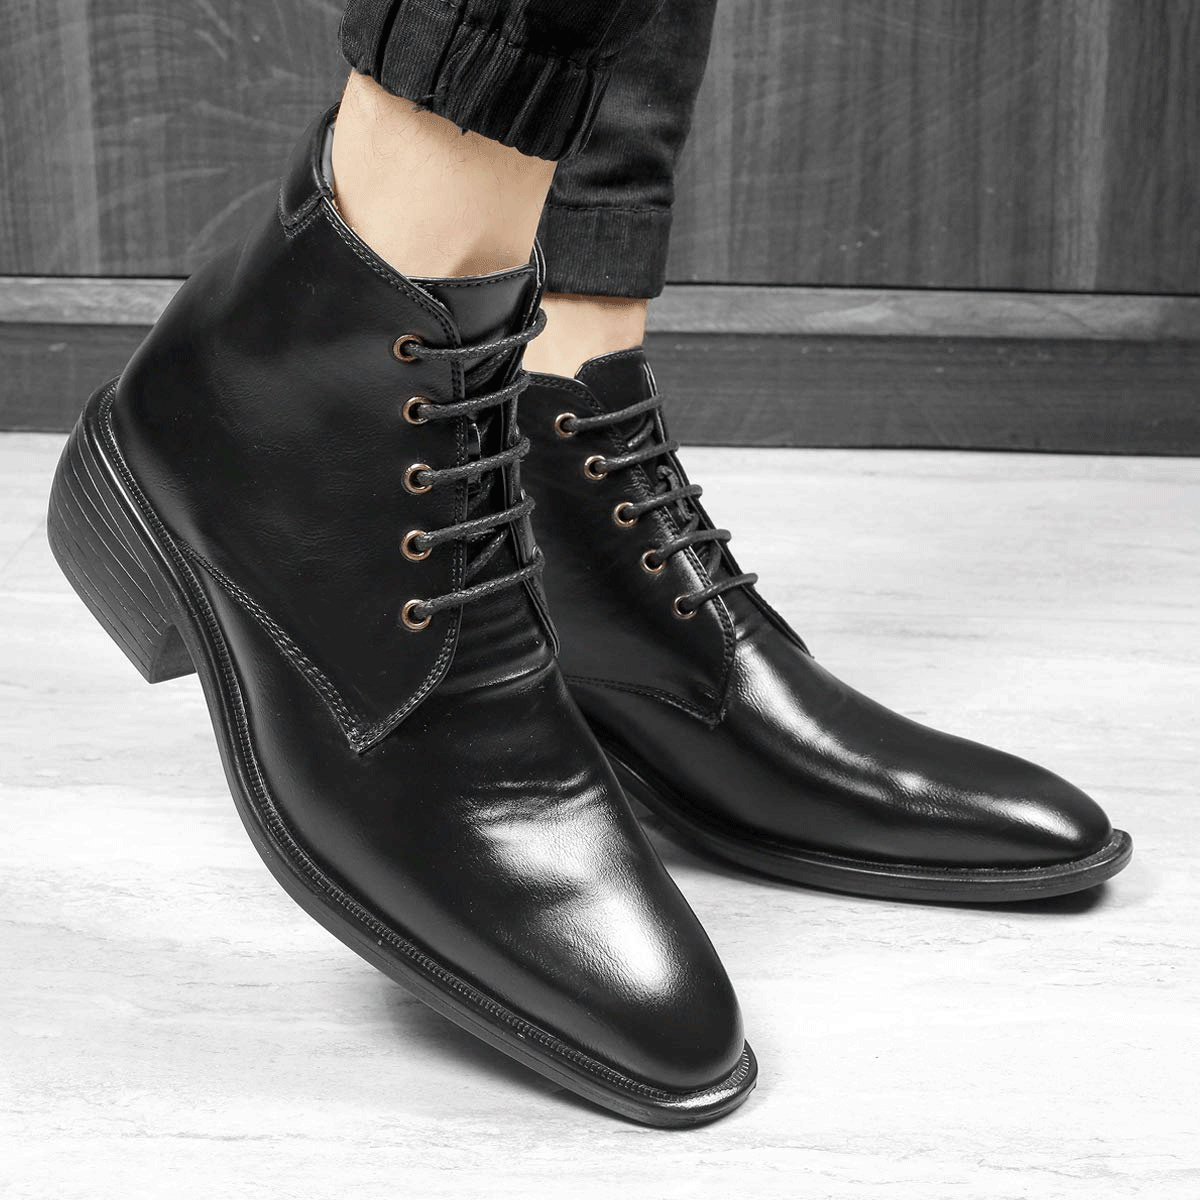 High Ankle Height Increasing Black Casual And Outdoor Boots With Lace ...